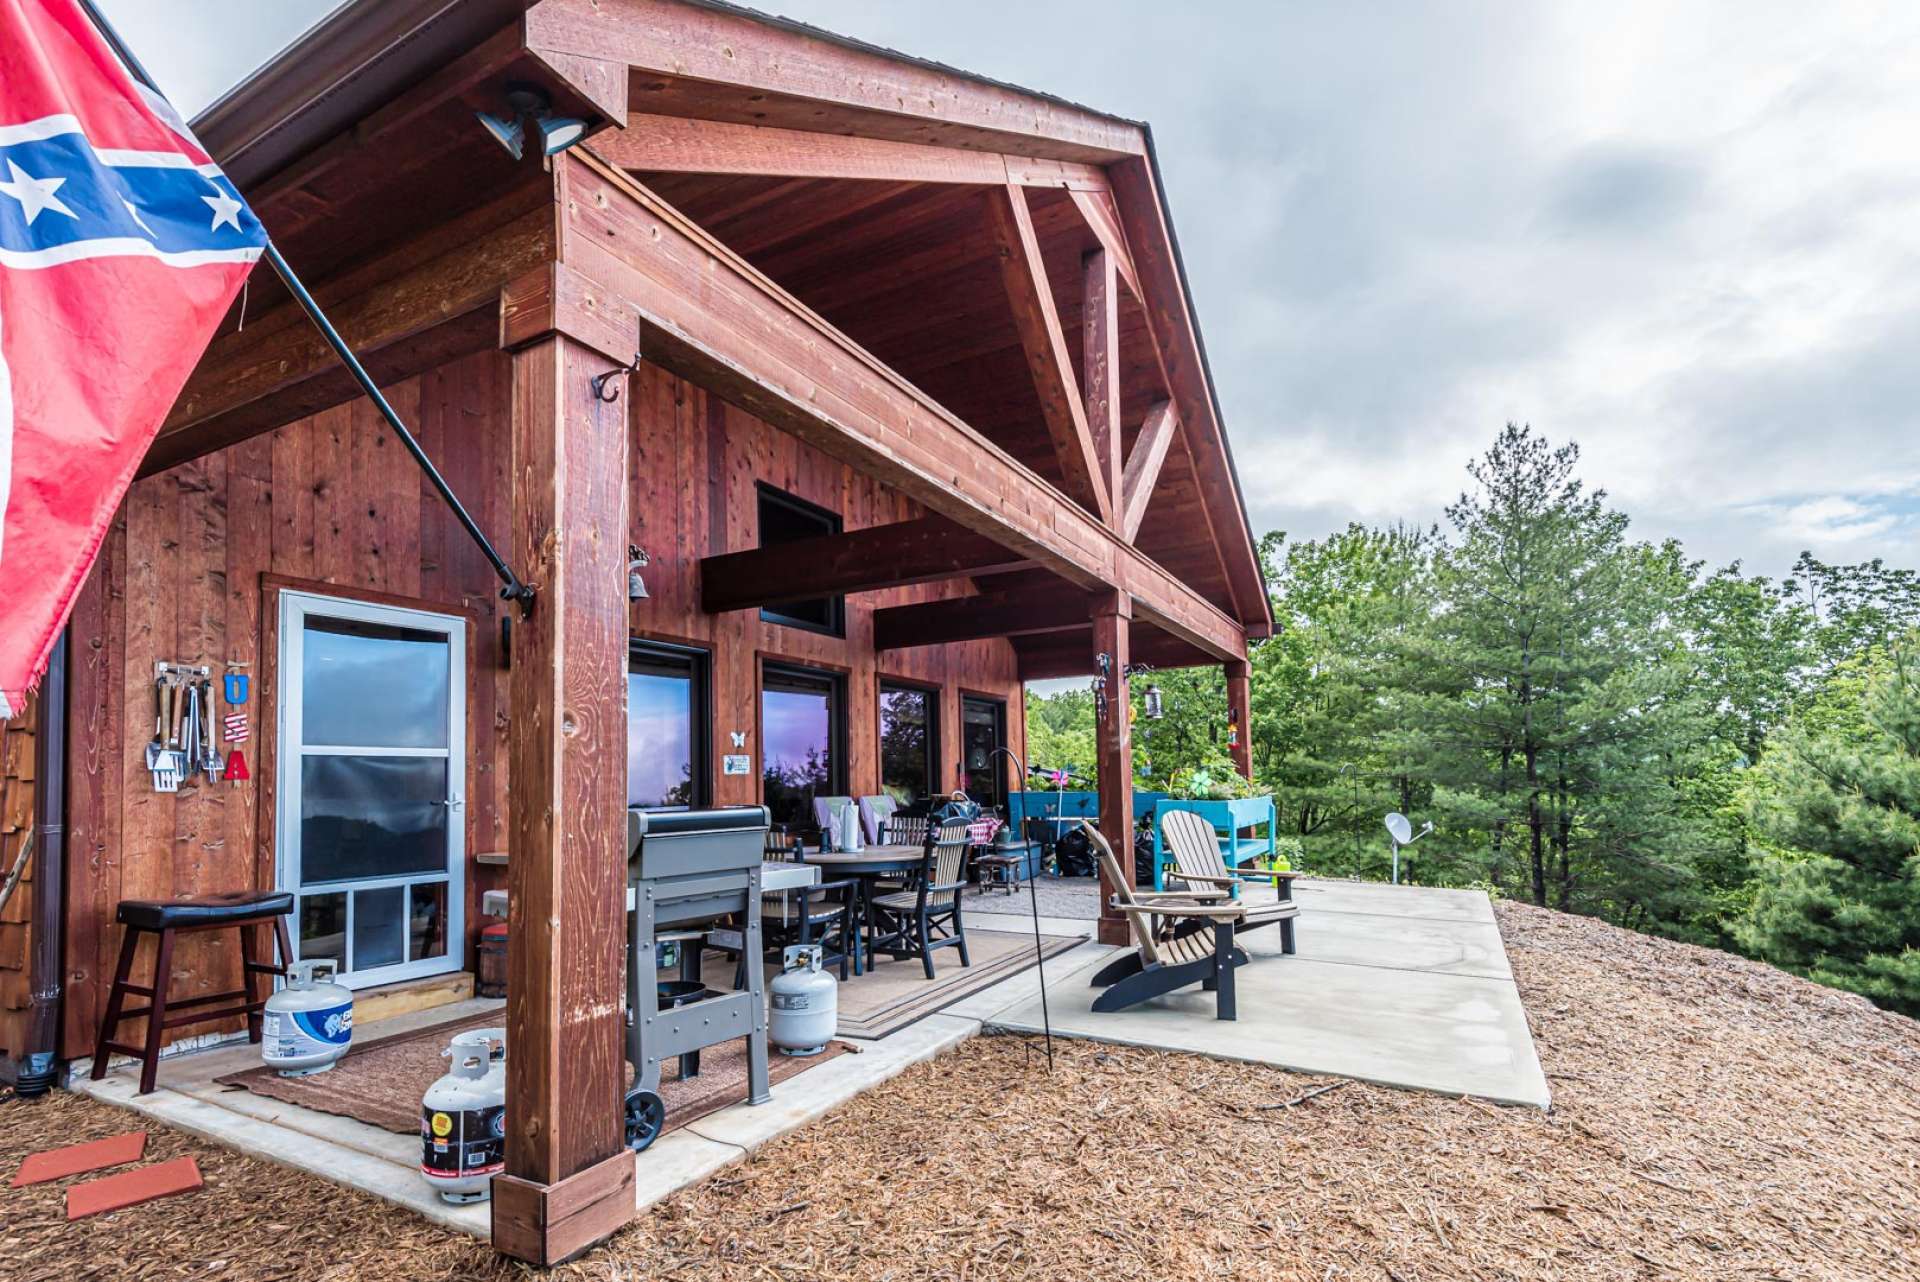 This vaulted covered porch offers plenty of space for outdoor grilling, dining, and entertaining.